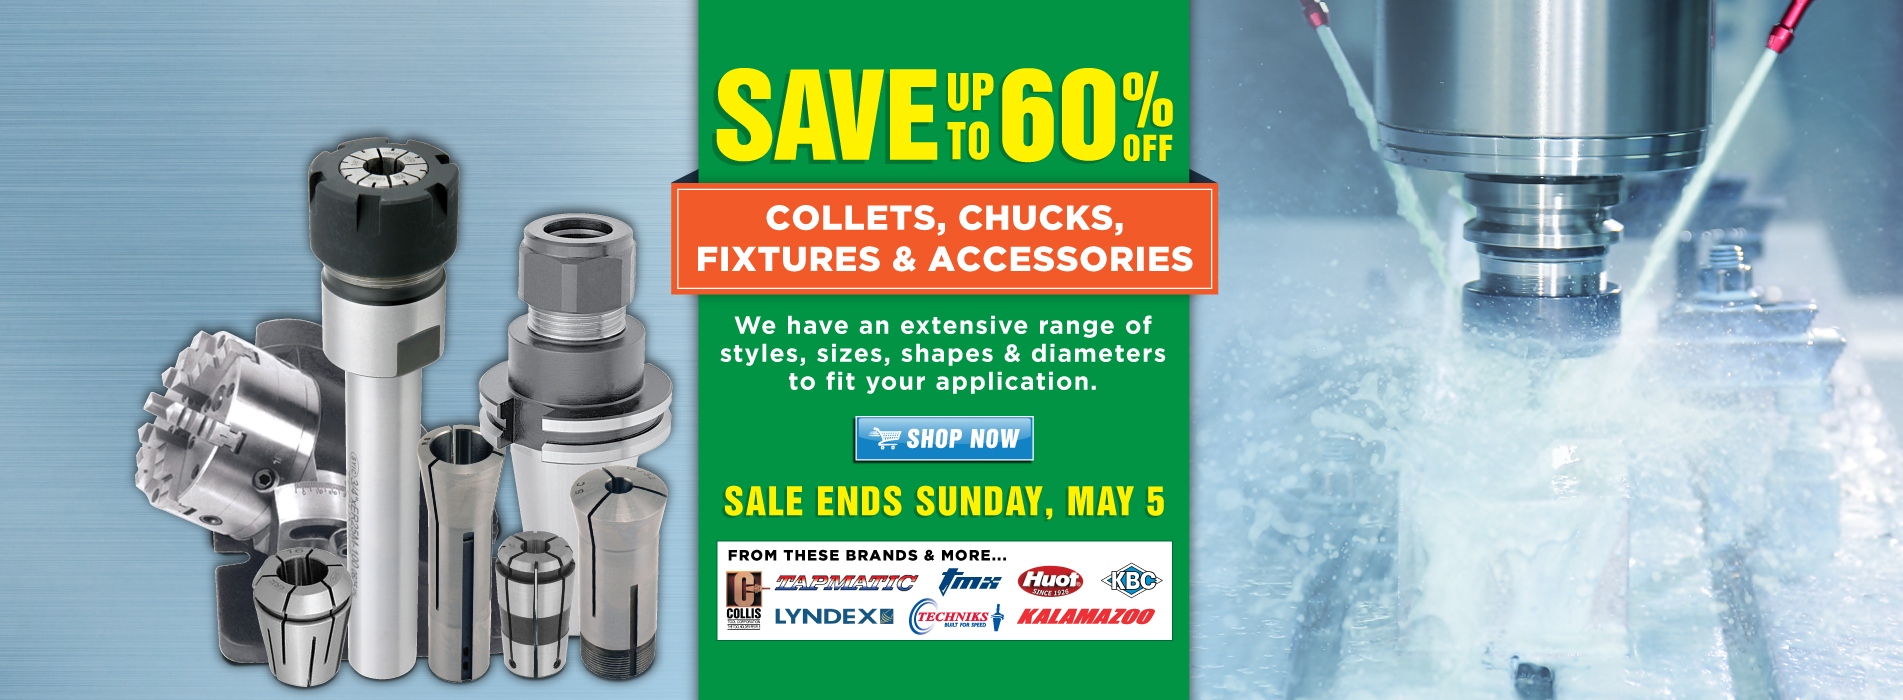 Get a Grip on Savings: Up to 60% Off Collets, Chucks, & More! Why let go of more cash than you need to? Save up to 60% on our top work holding tools.